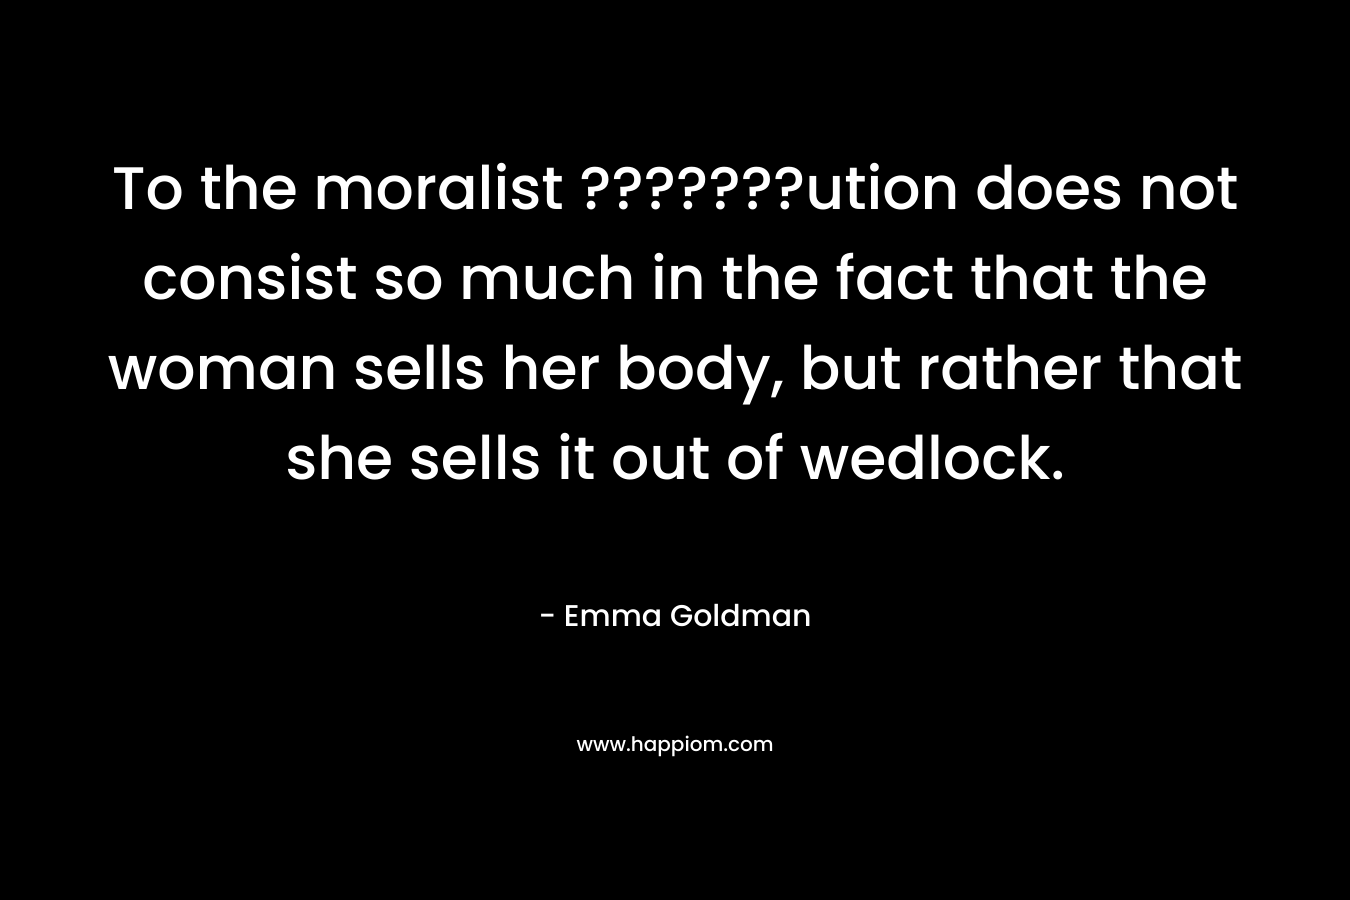 To the moralist ???????ution does not consist so much in the fact that the woman sells her body, but rather that she sells it out of wedlock. – Emma Goldman